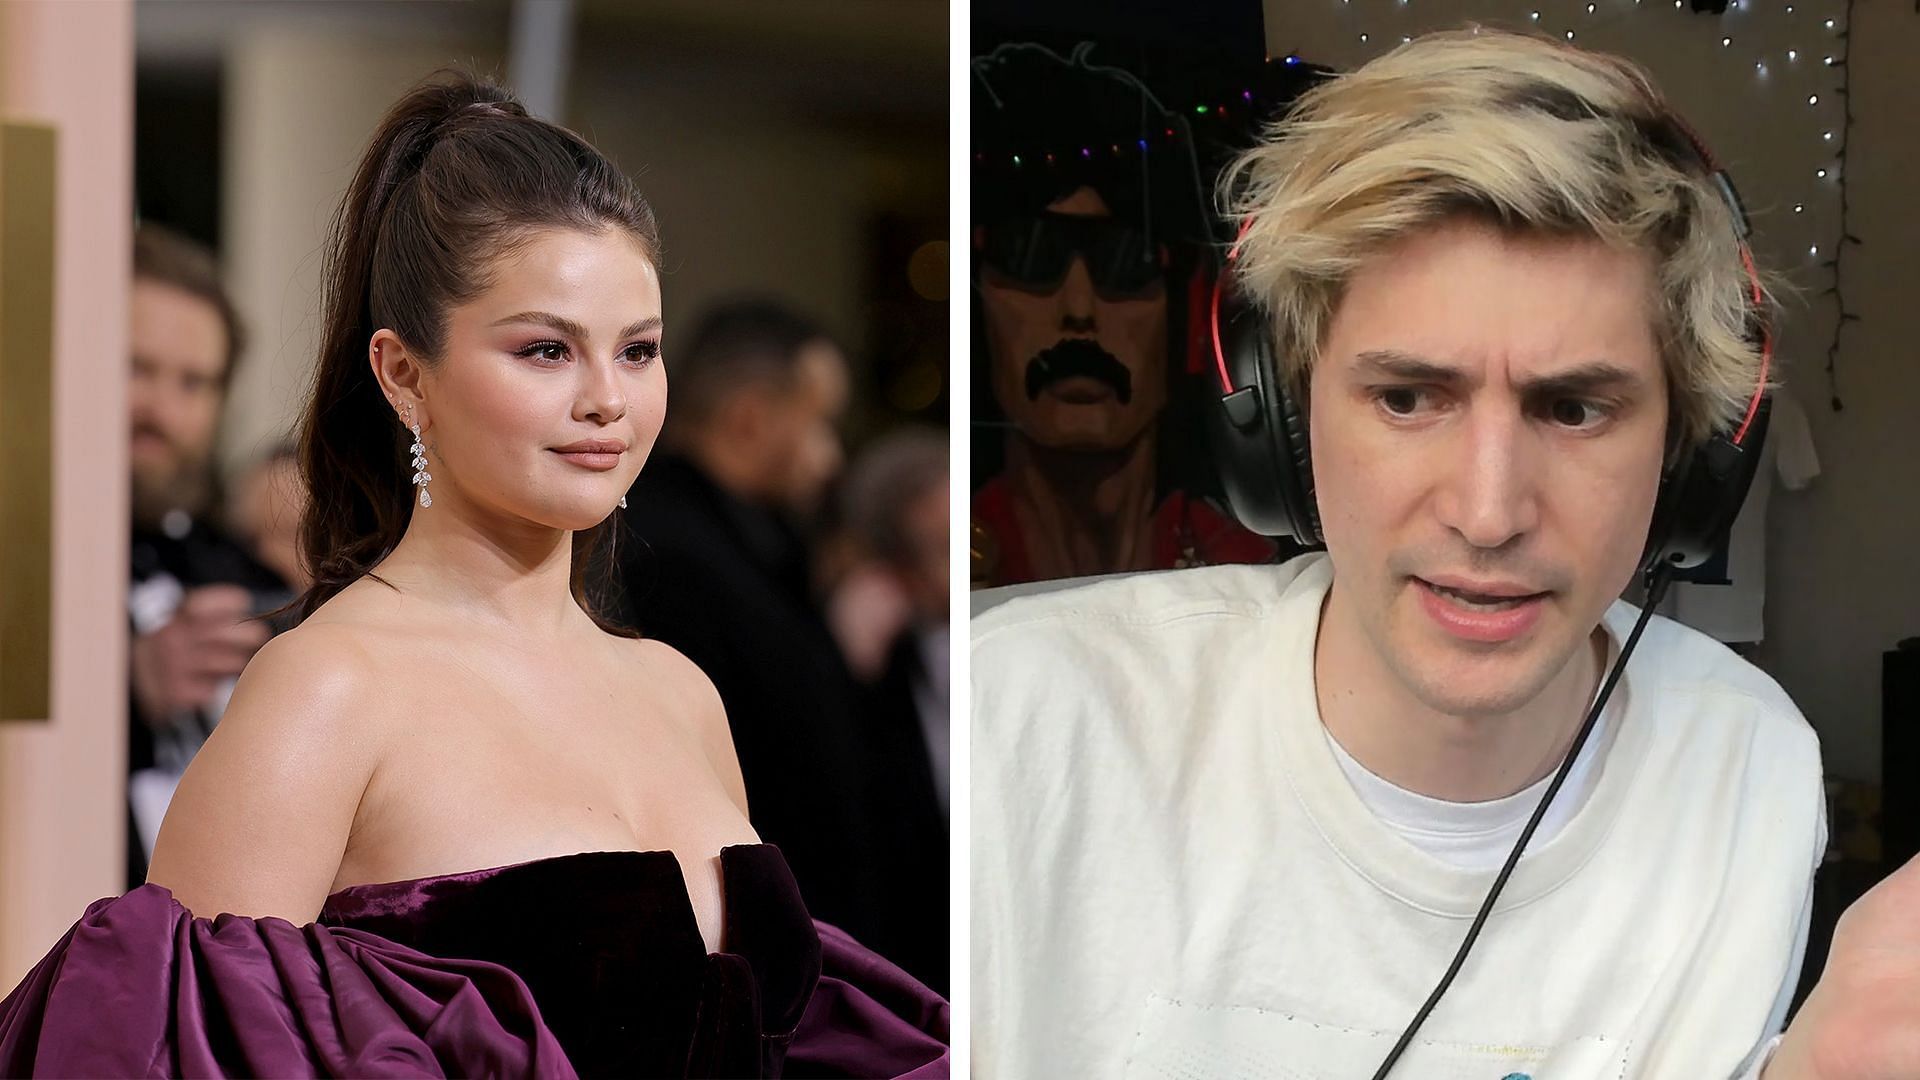 xQc recently recounted his attempt to catch the eye of Selena Gomez.